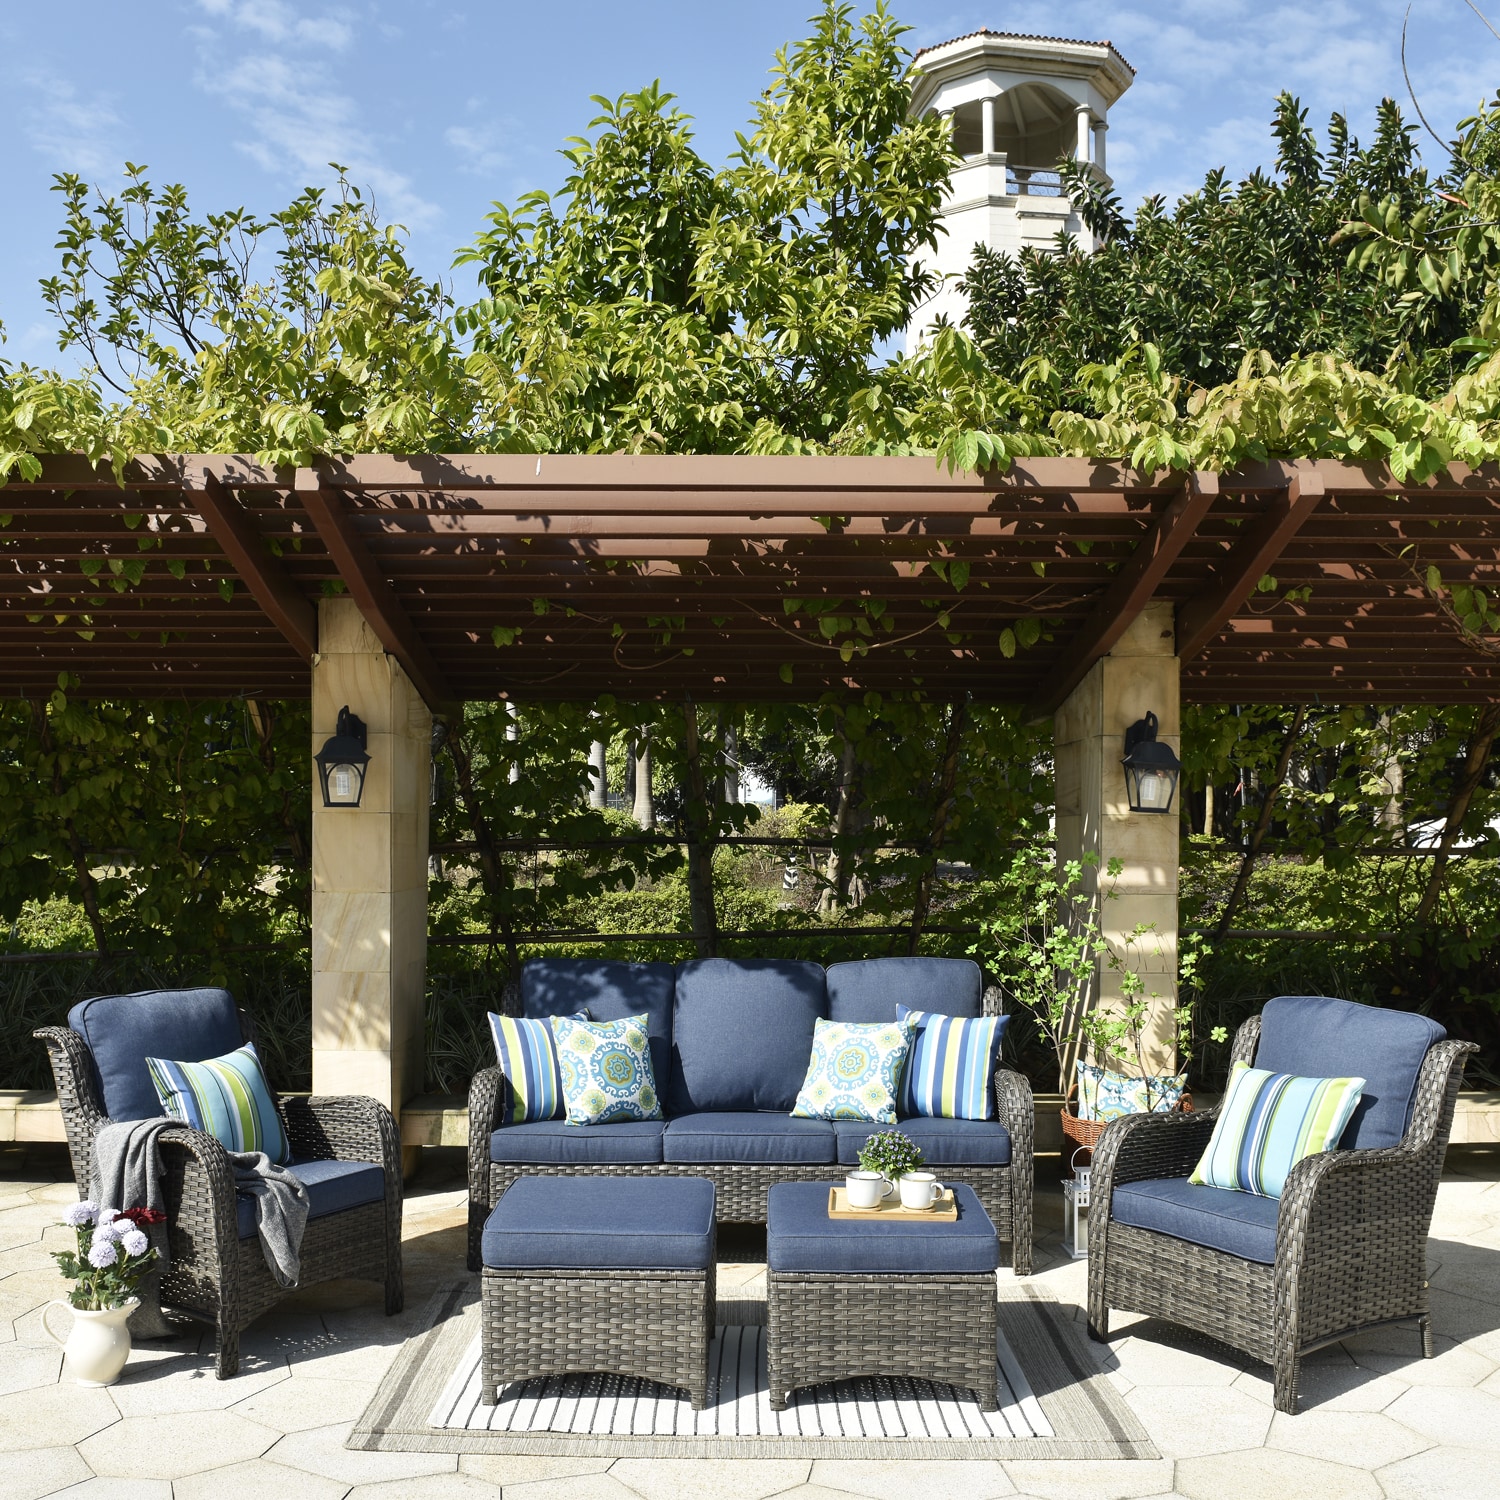 Patio Furniture Sets At Lowes.Com